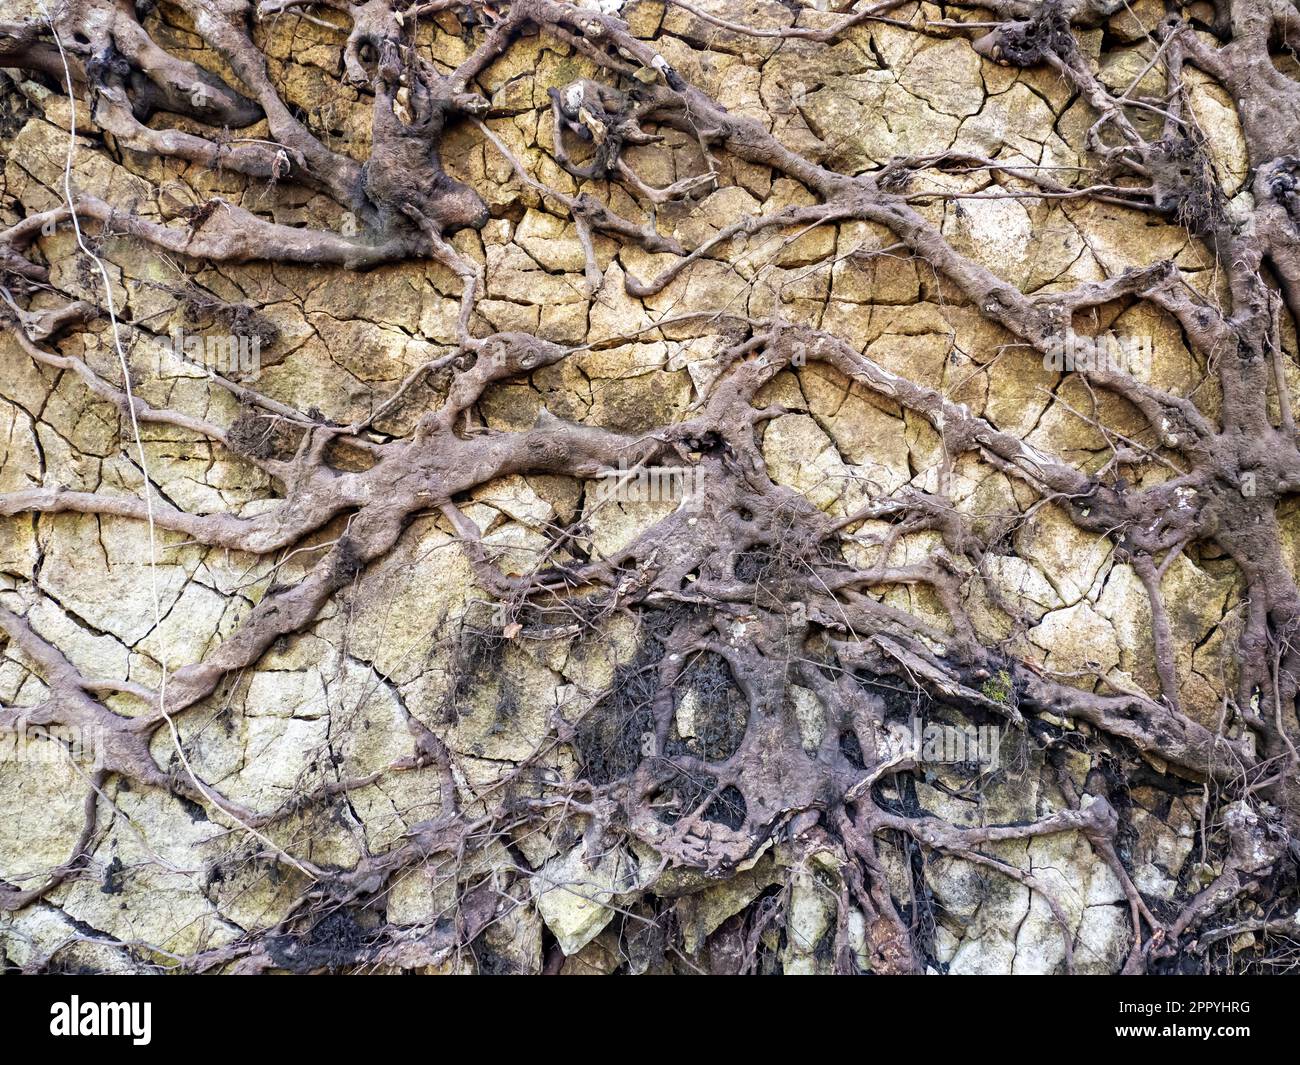 The roots and rock from a tree toppled by storm force winds in serpentine Woods, Kendal, Cumbria, UK. Stock Photo